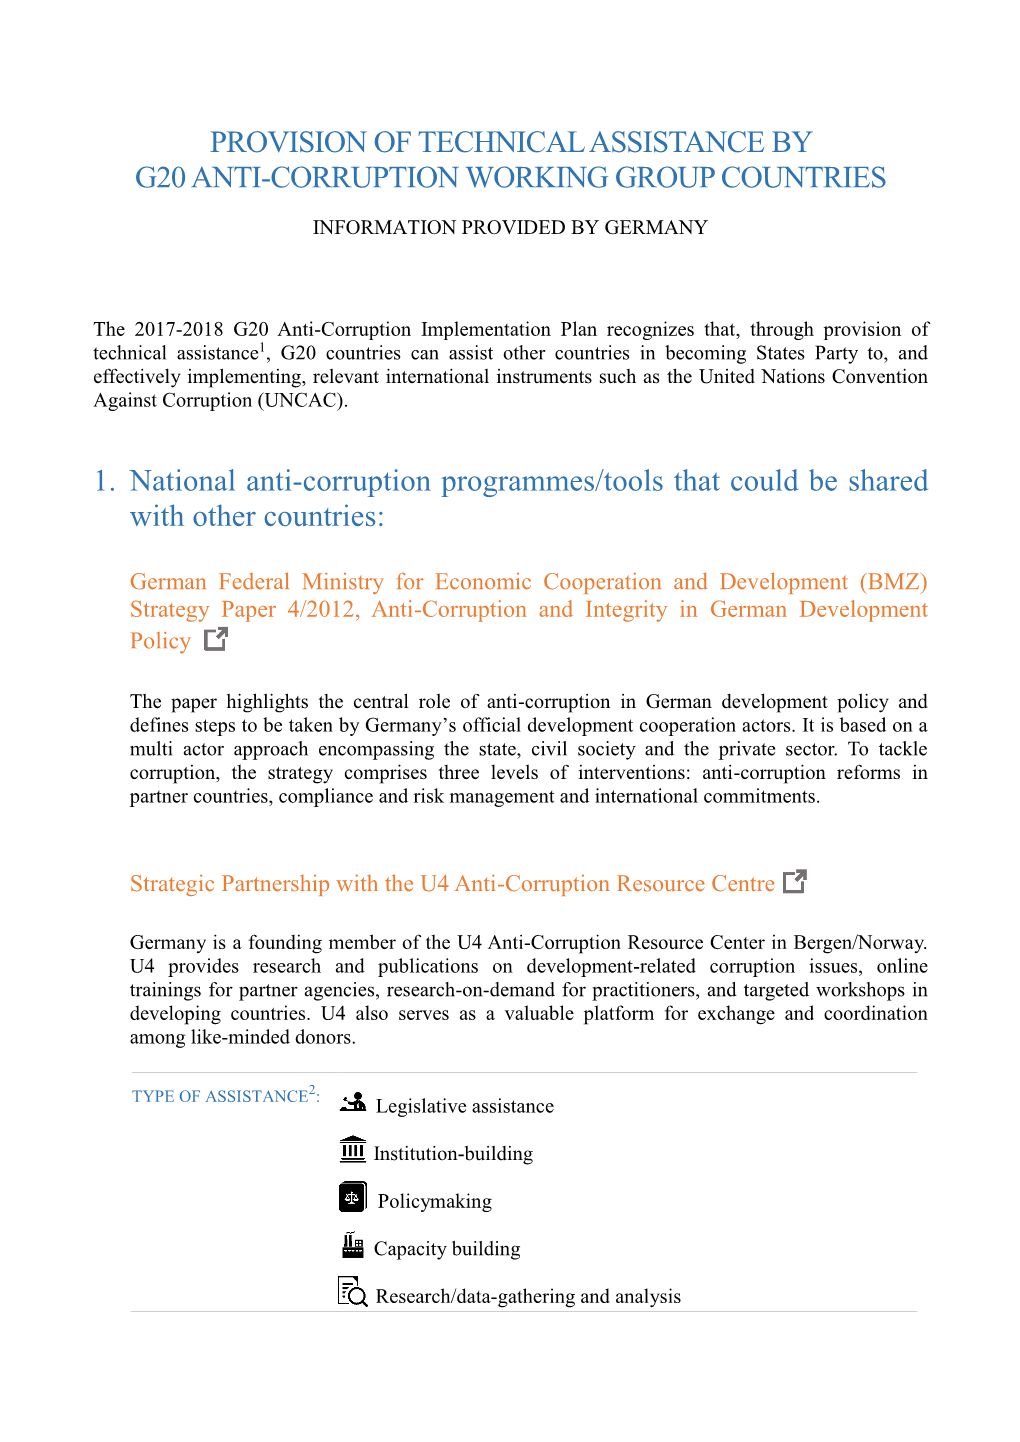 Provision of Technical Assistance by G20 Anti-Corruption Working Group Countries